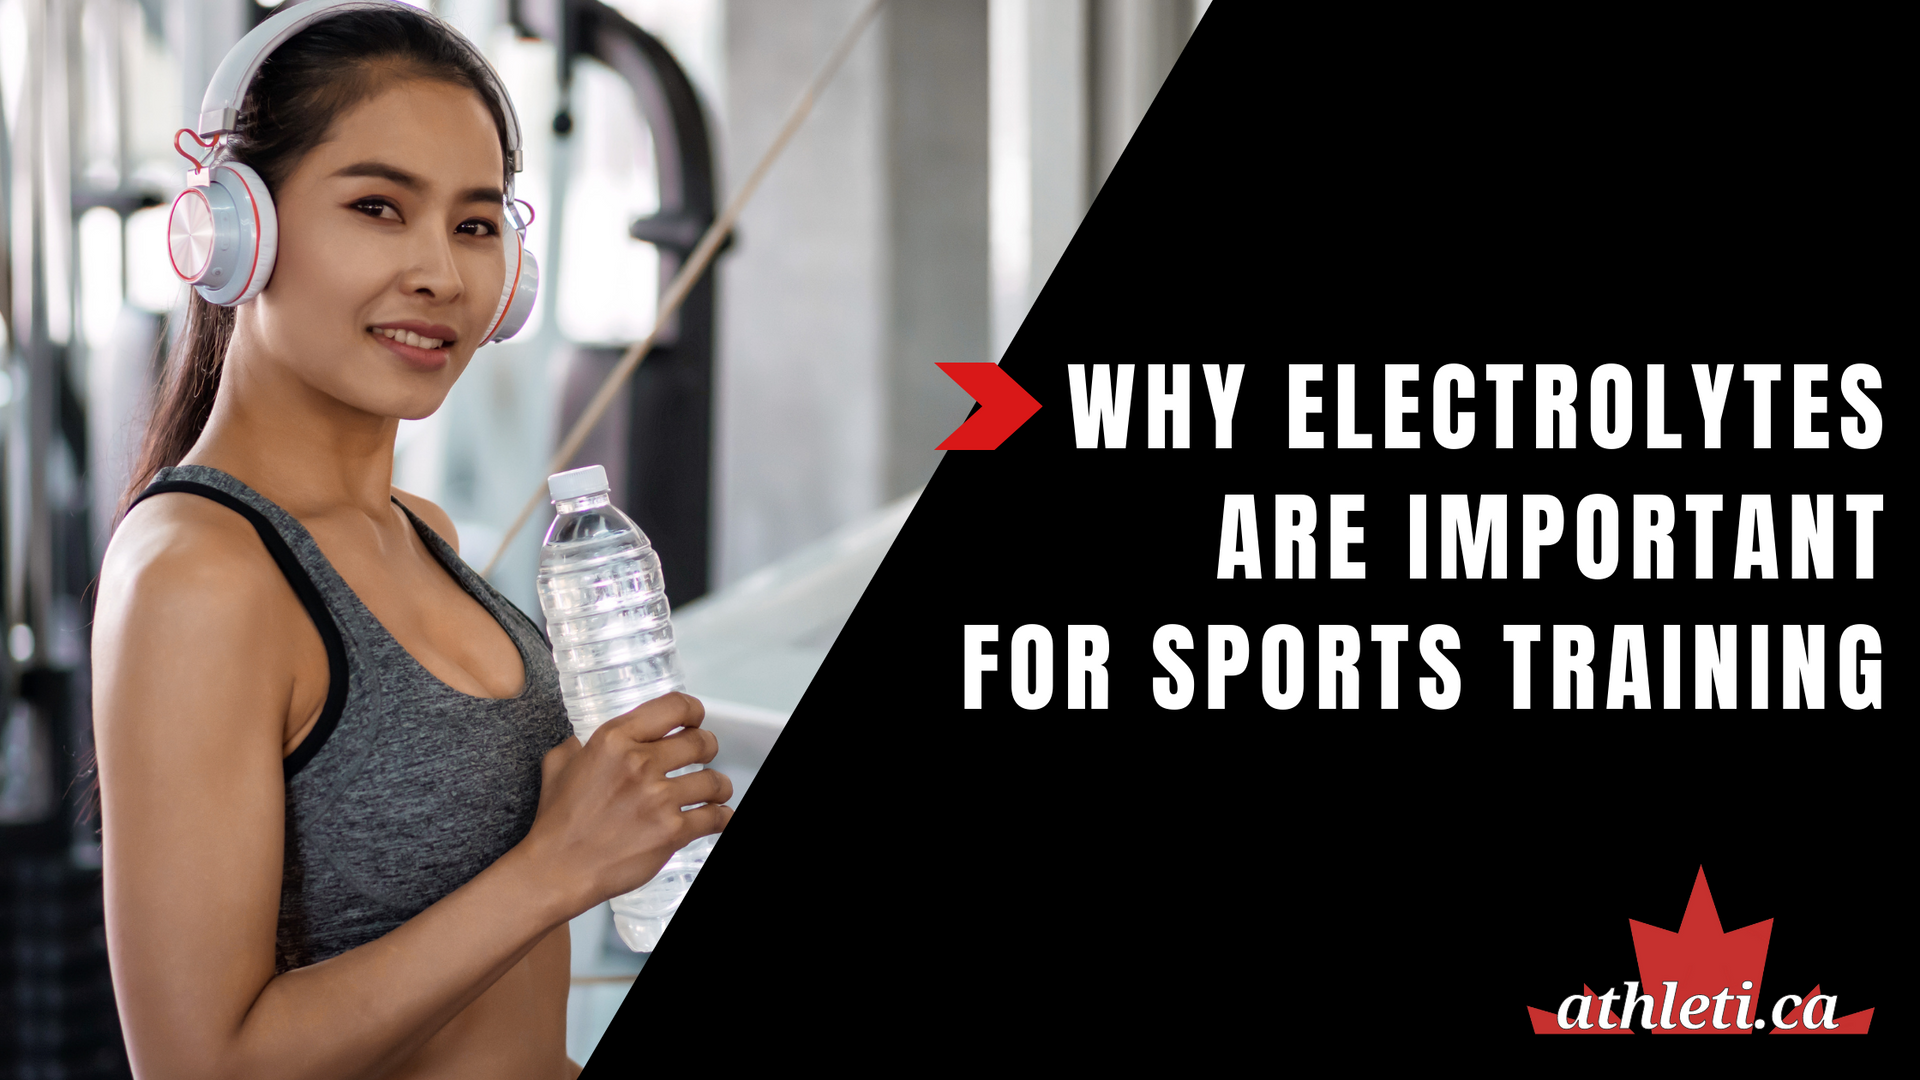 Why Electrolytes are Important for Sports Training